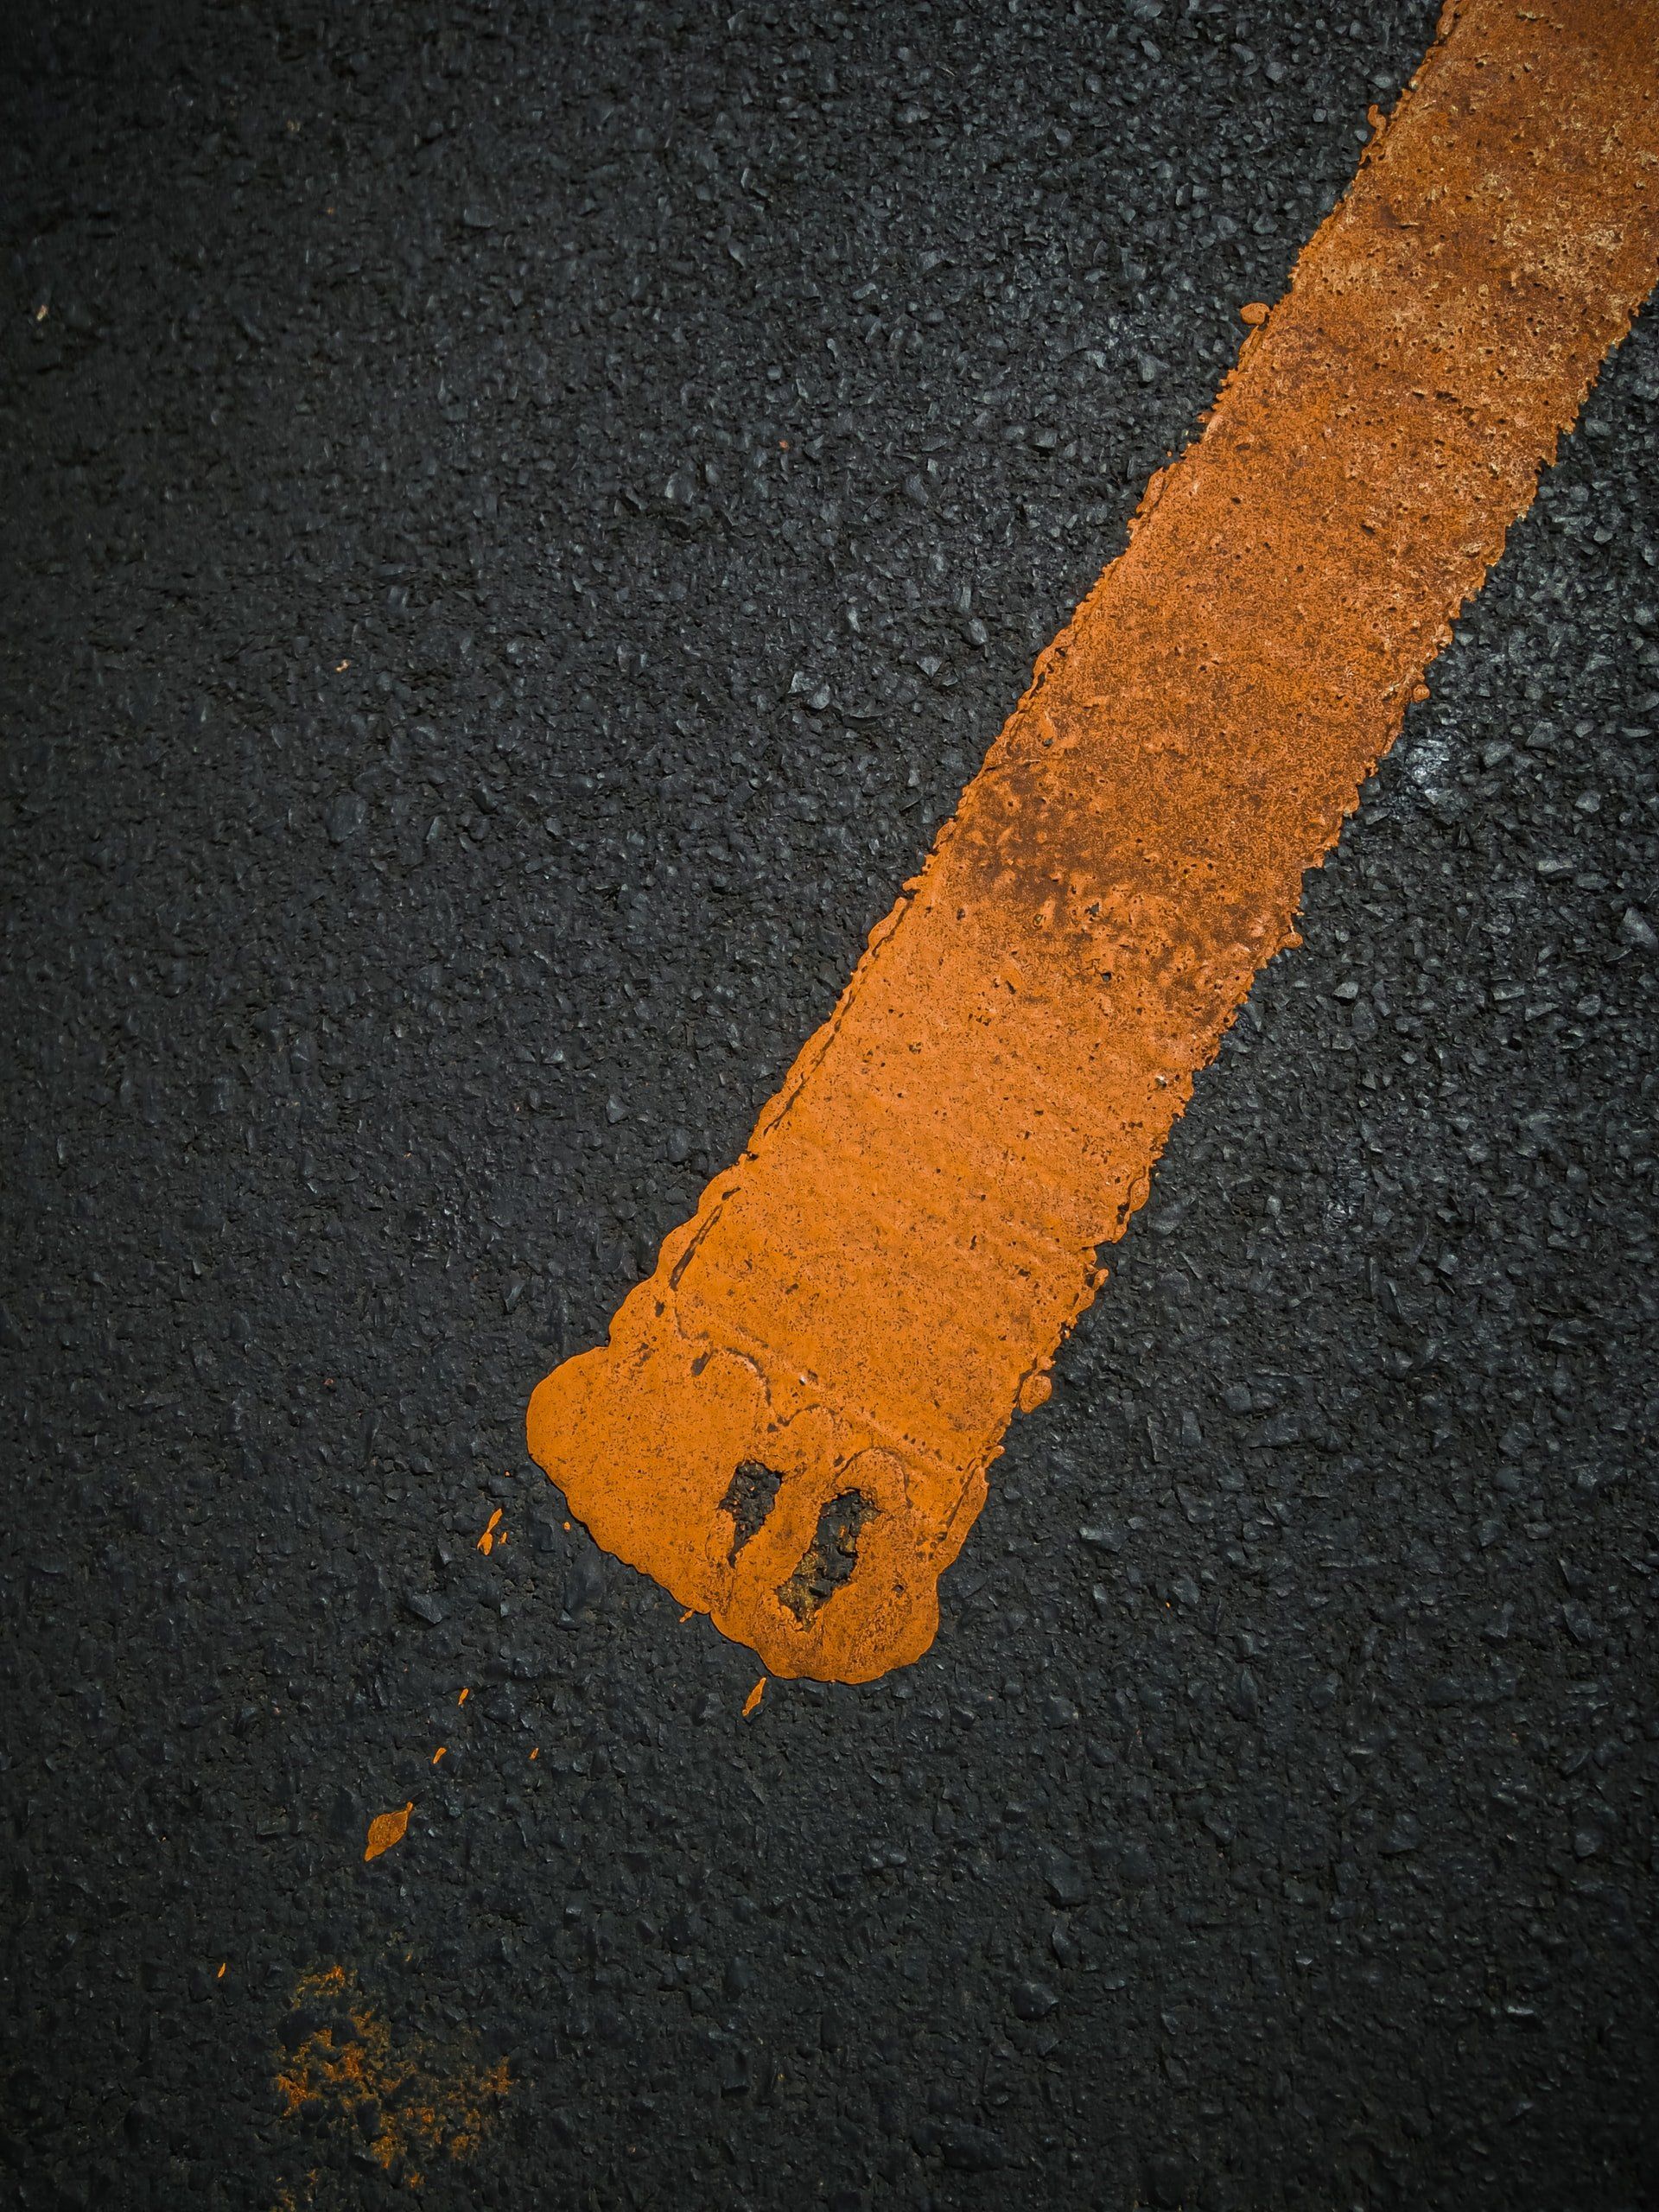 Rich, black asphalt with a faded painted yellow line.